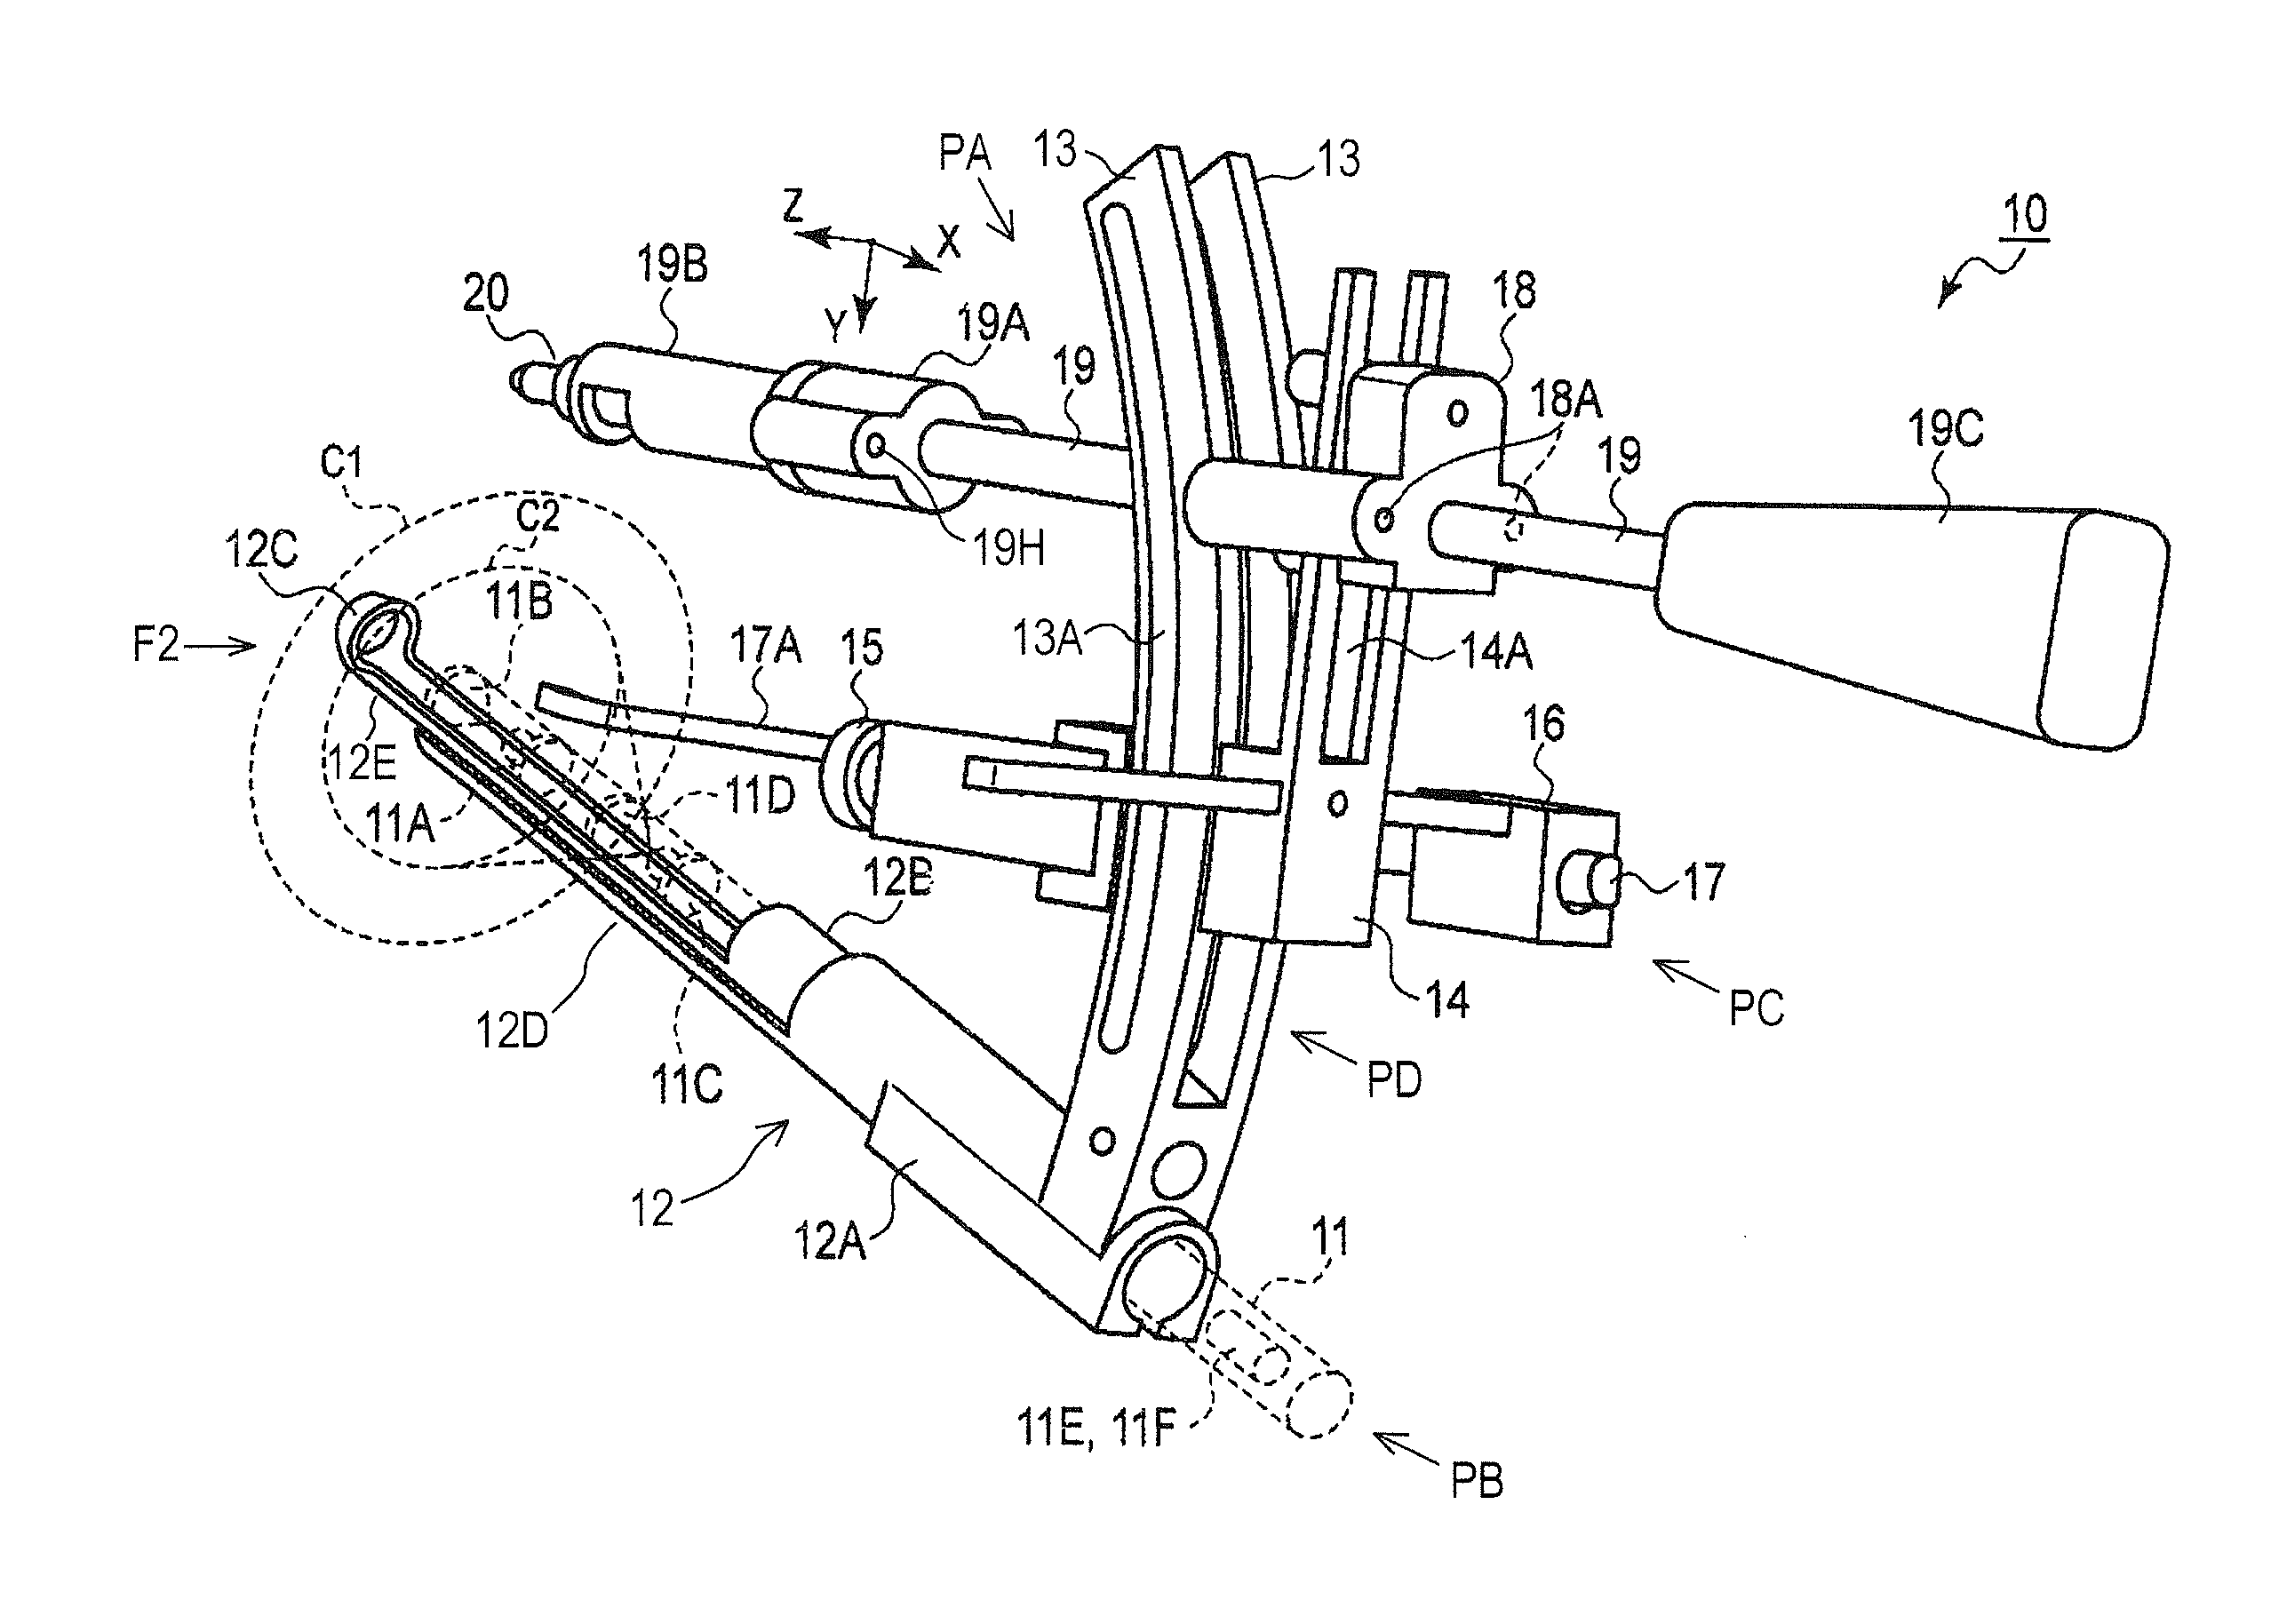 Navigation device for joint replacement and surgical support device